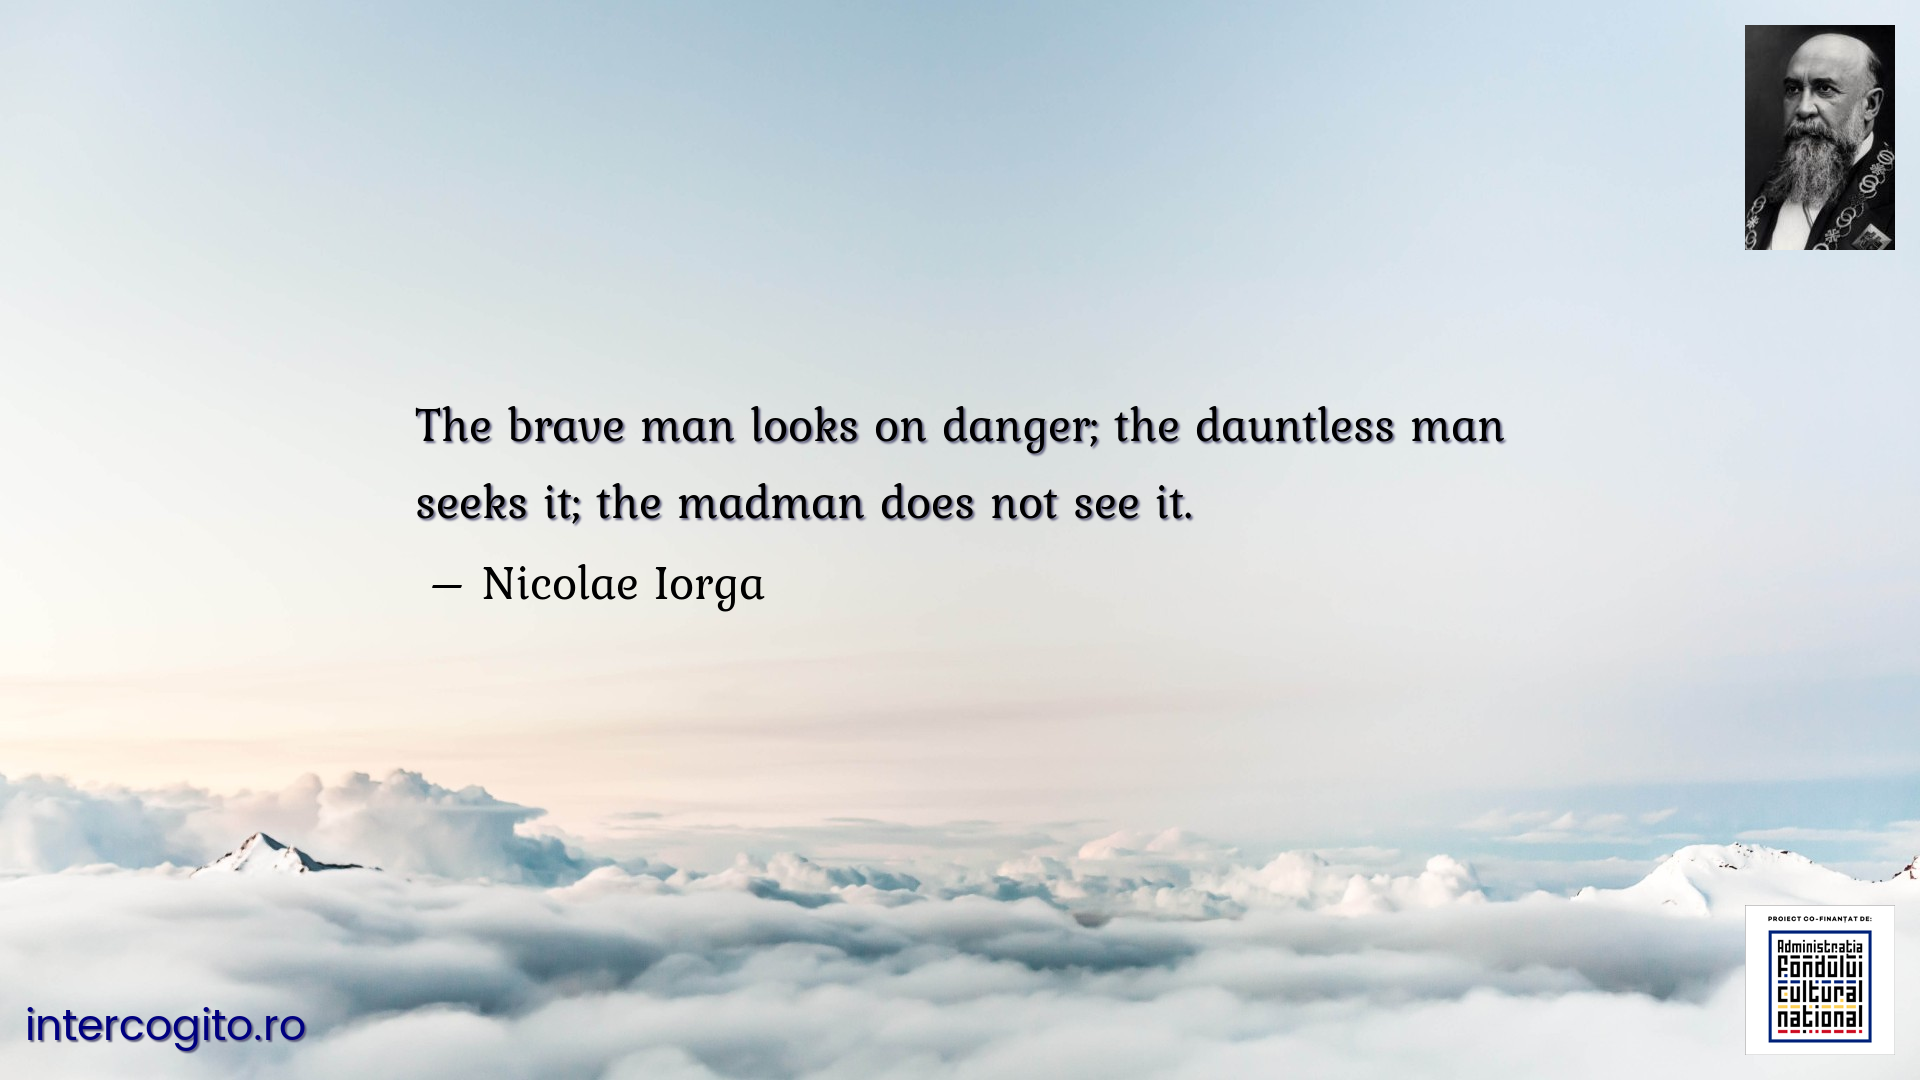 The brave man looks on danger; the dauntless man seeks it; the madman does not see it.